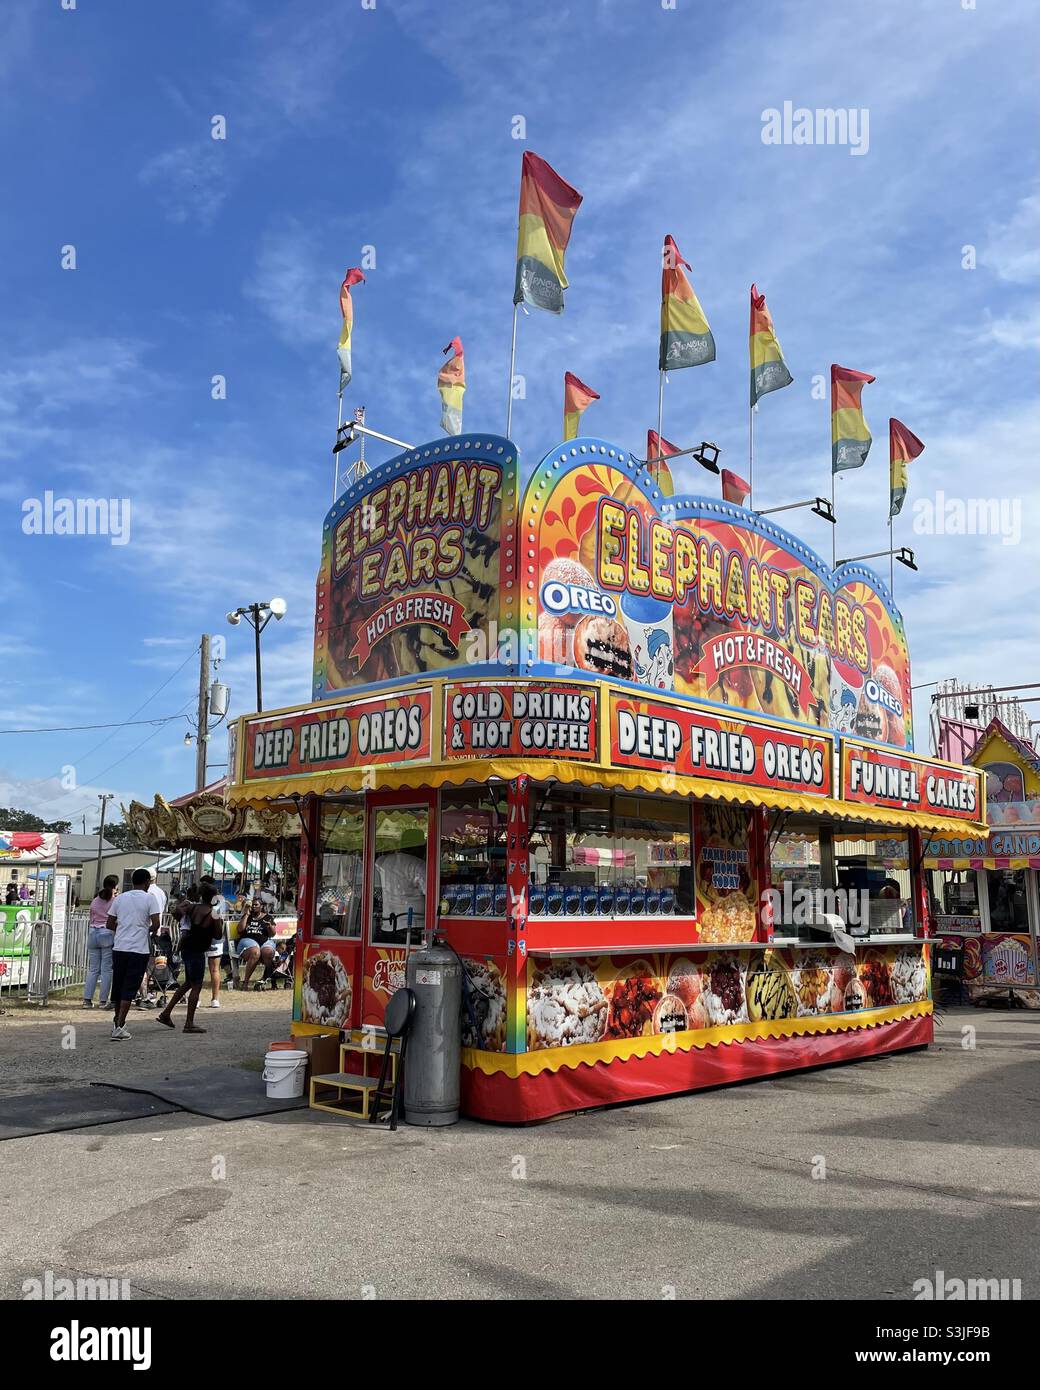 Colorful outdoor food vendor at a fall festival Stock Photo